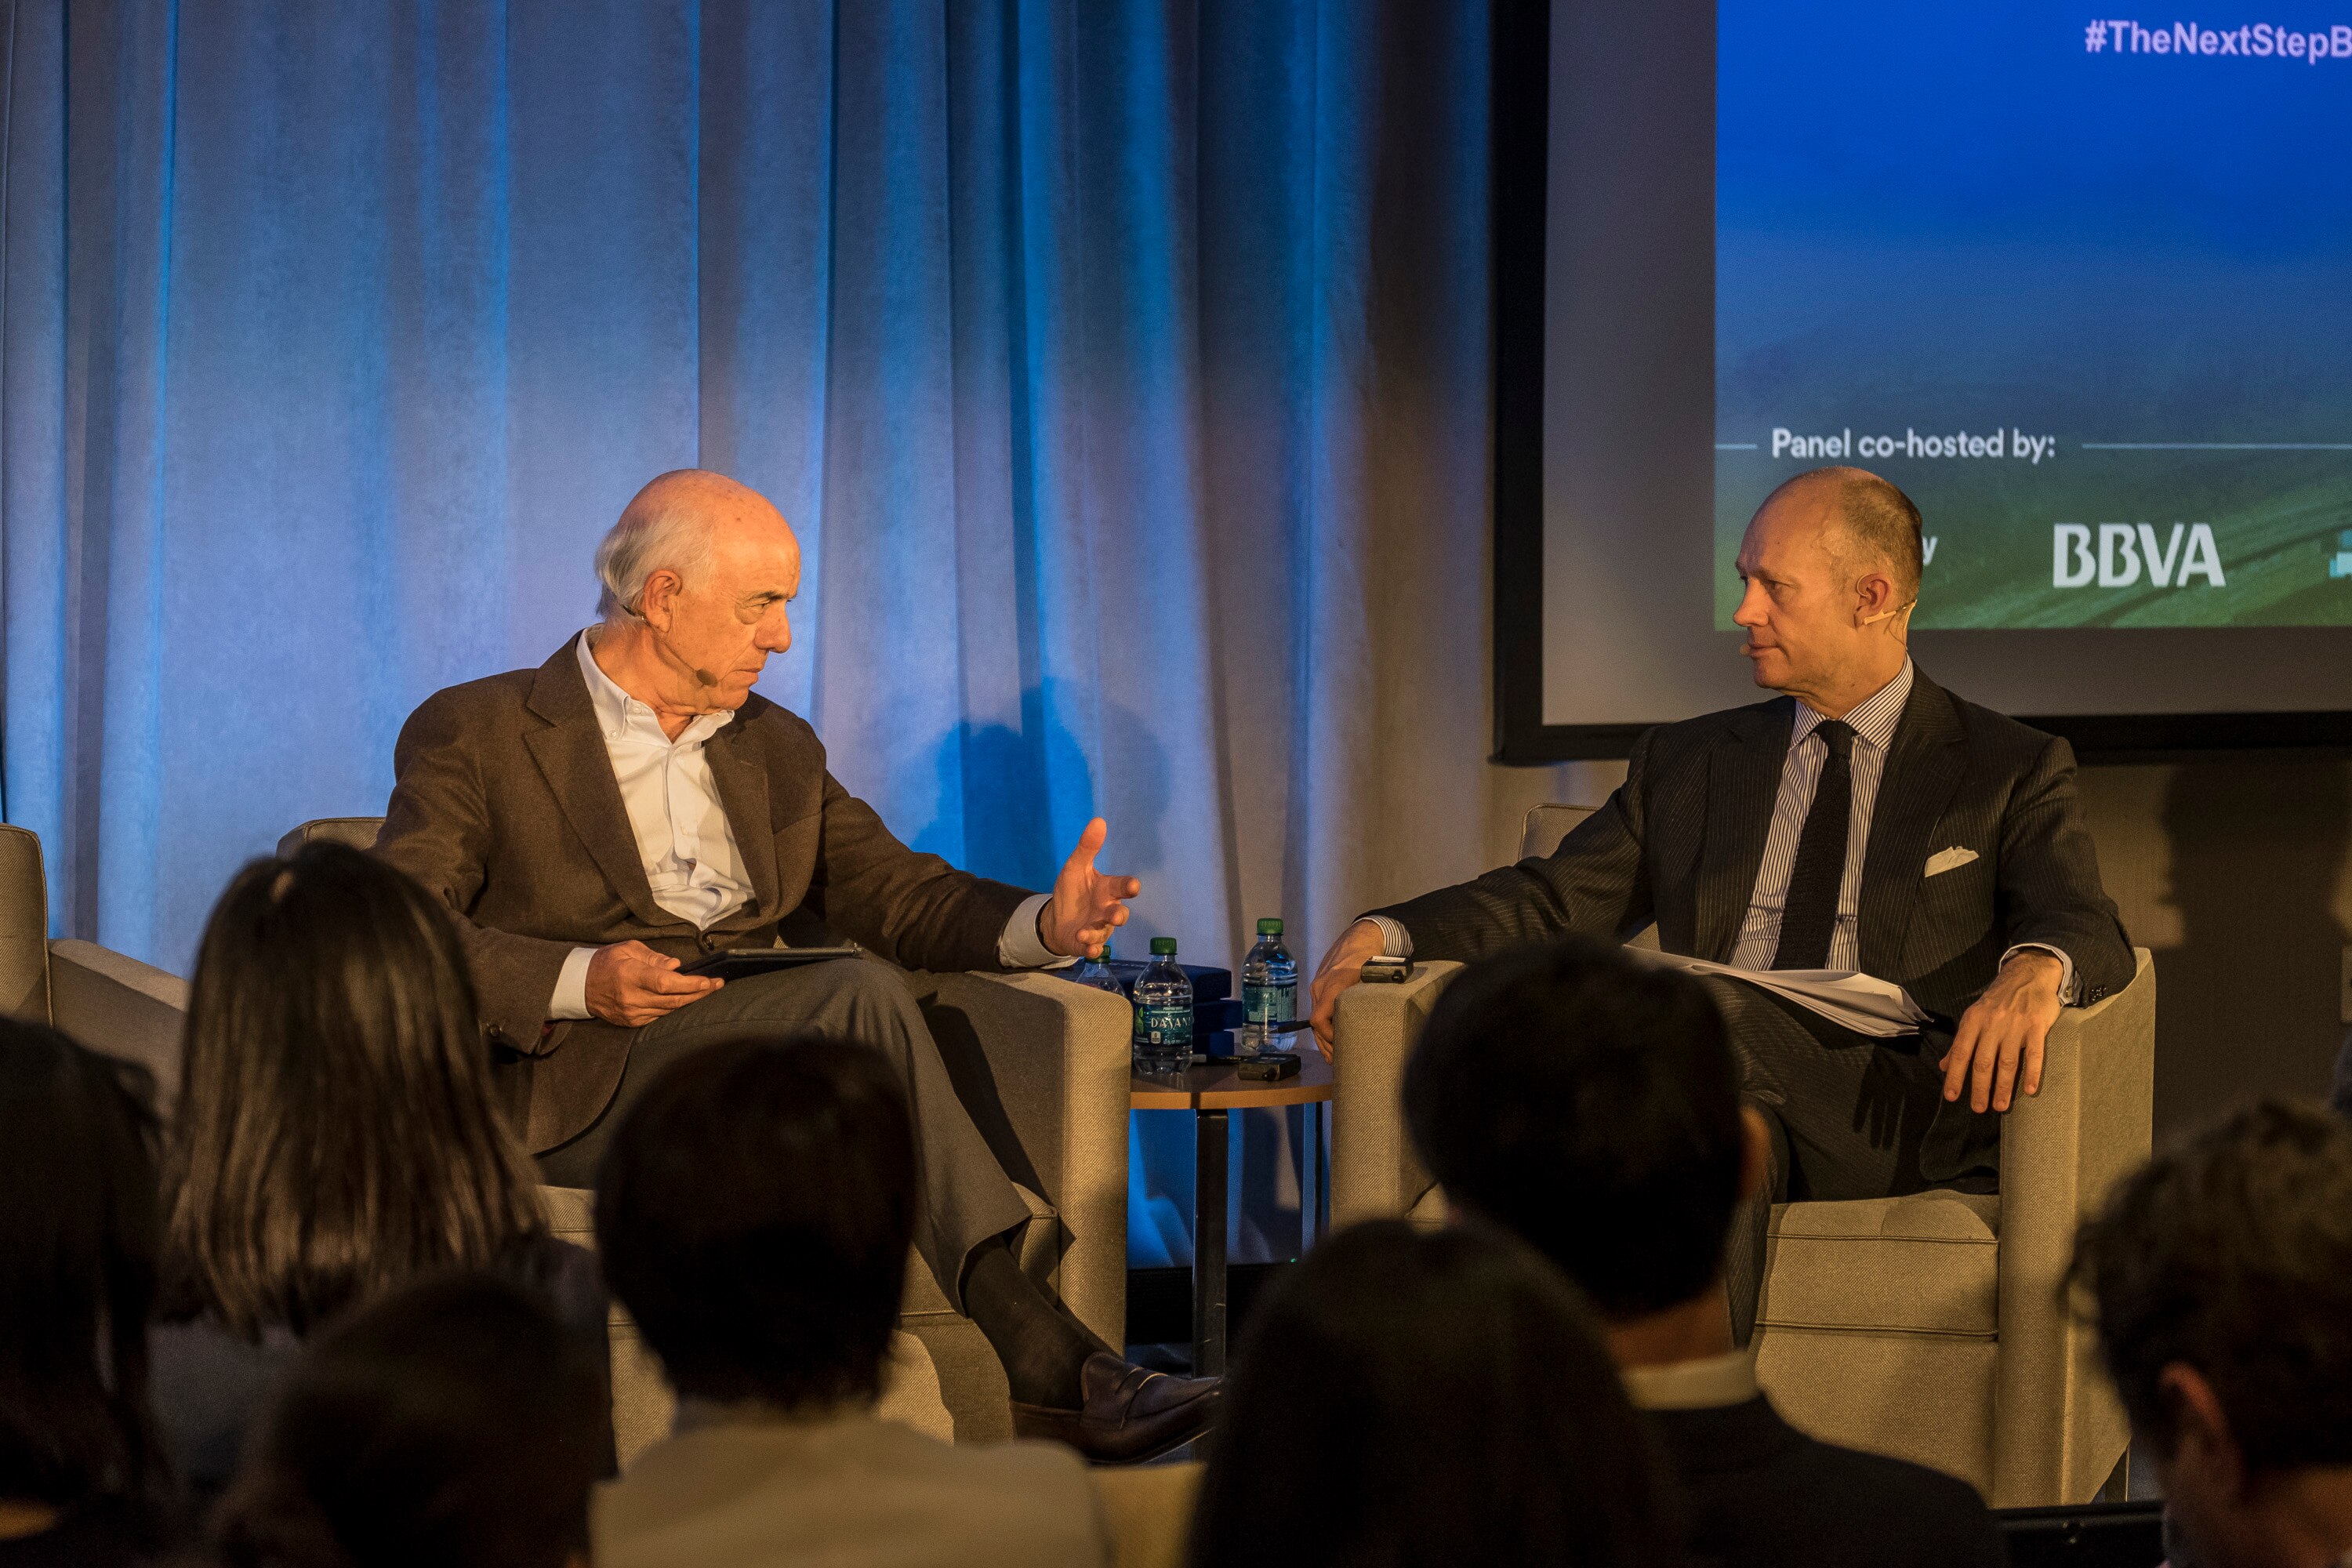 Francisco González, Group Executive Chairman of BBVA, presented the new OpenMind book at the MIT